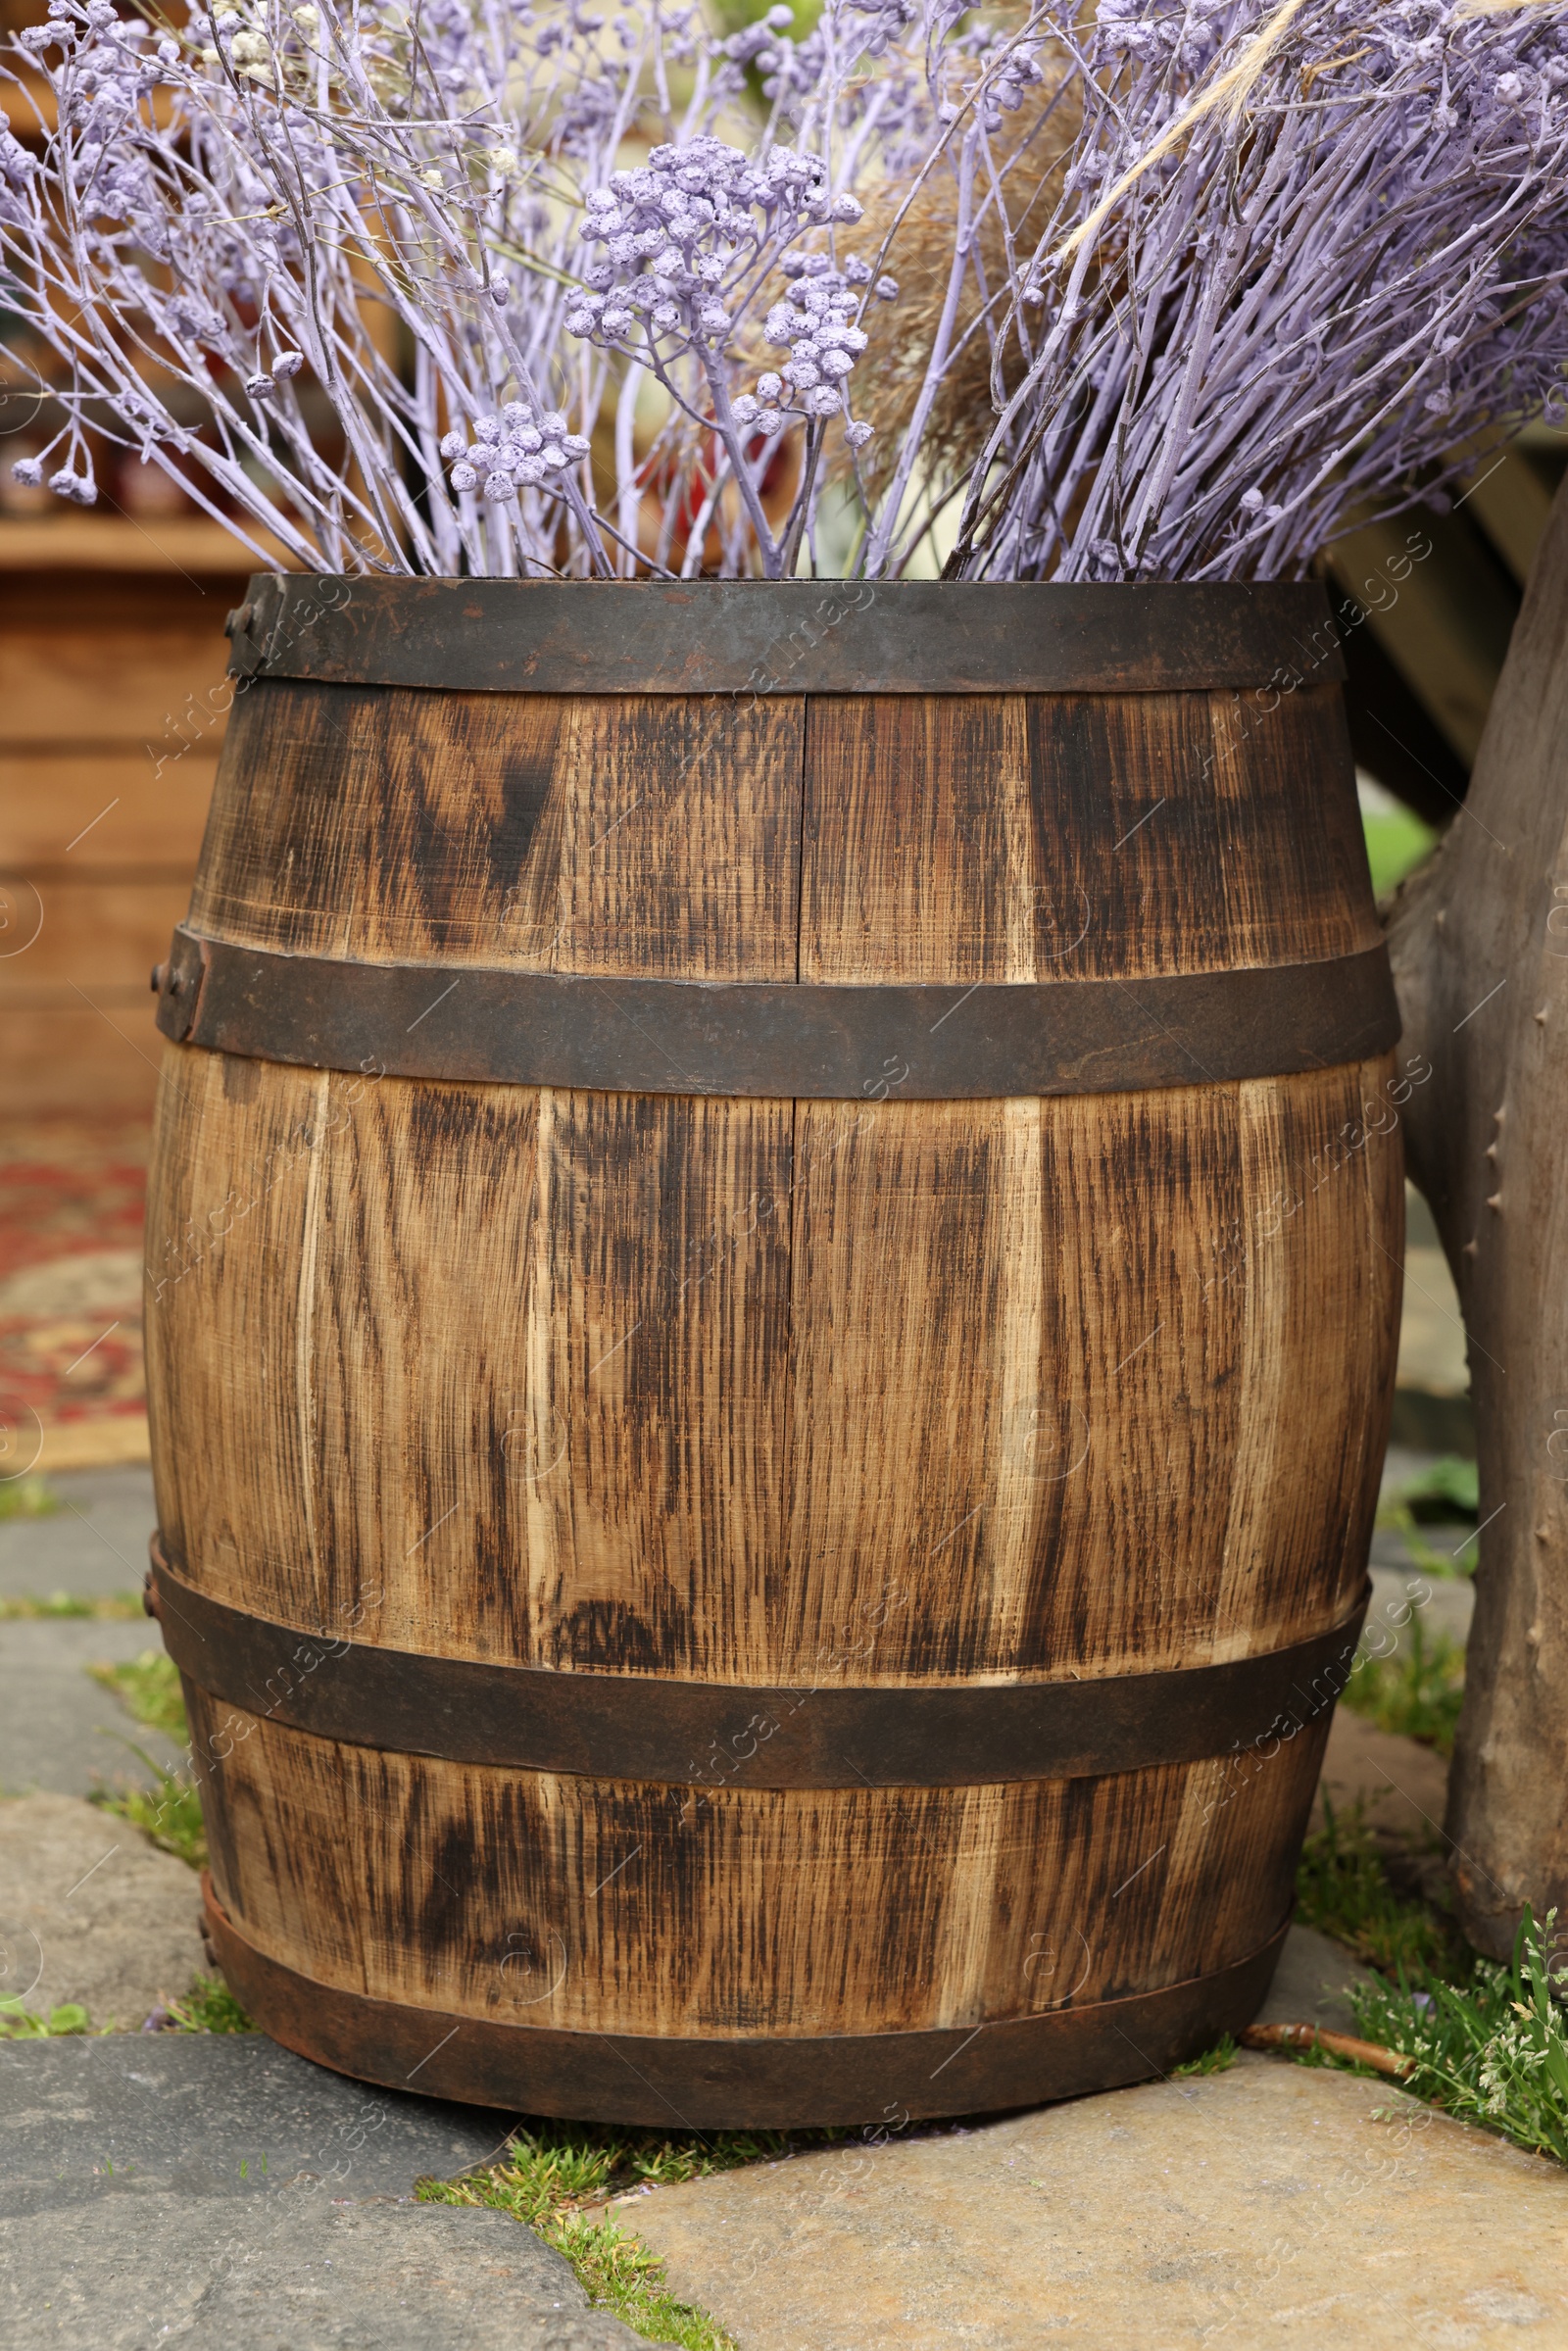 Photo of Traditional wooden barrel and beautiful decorative branches outdoors